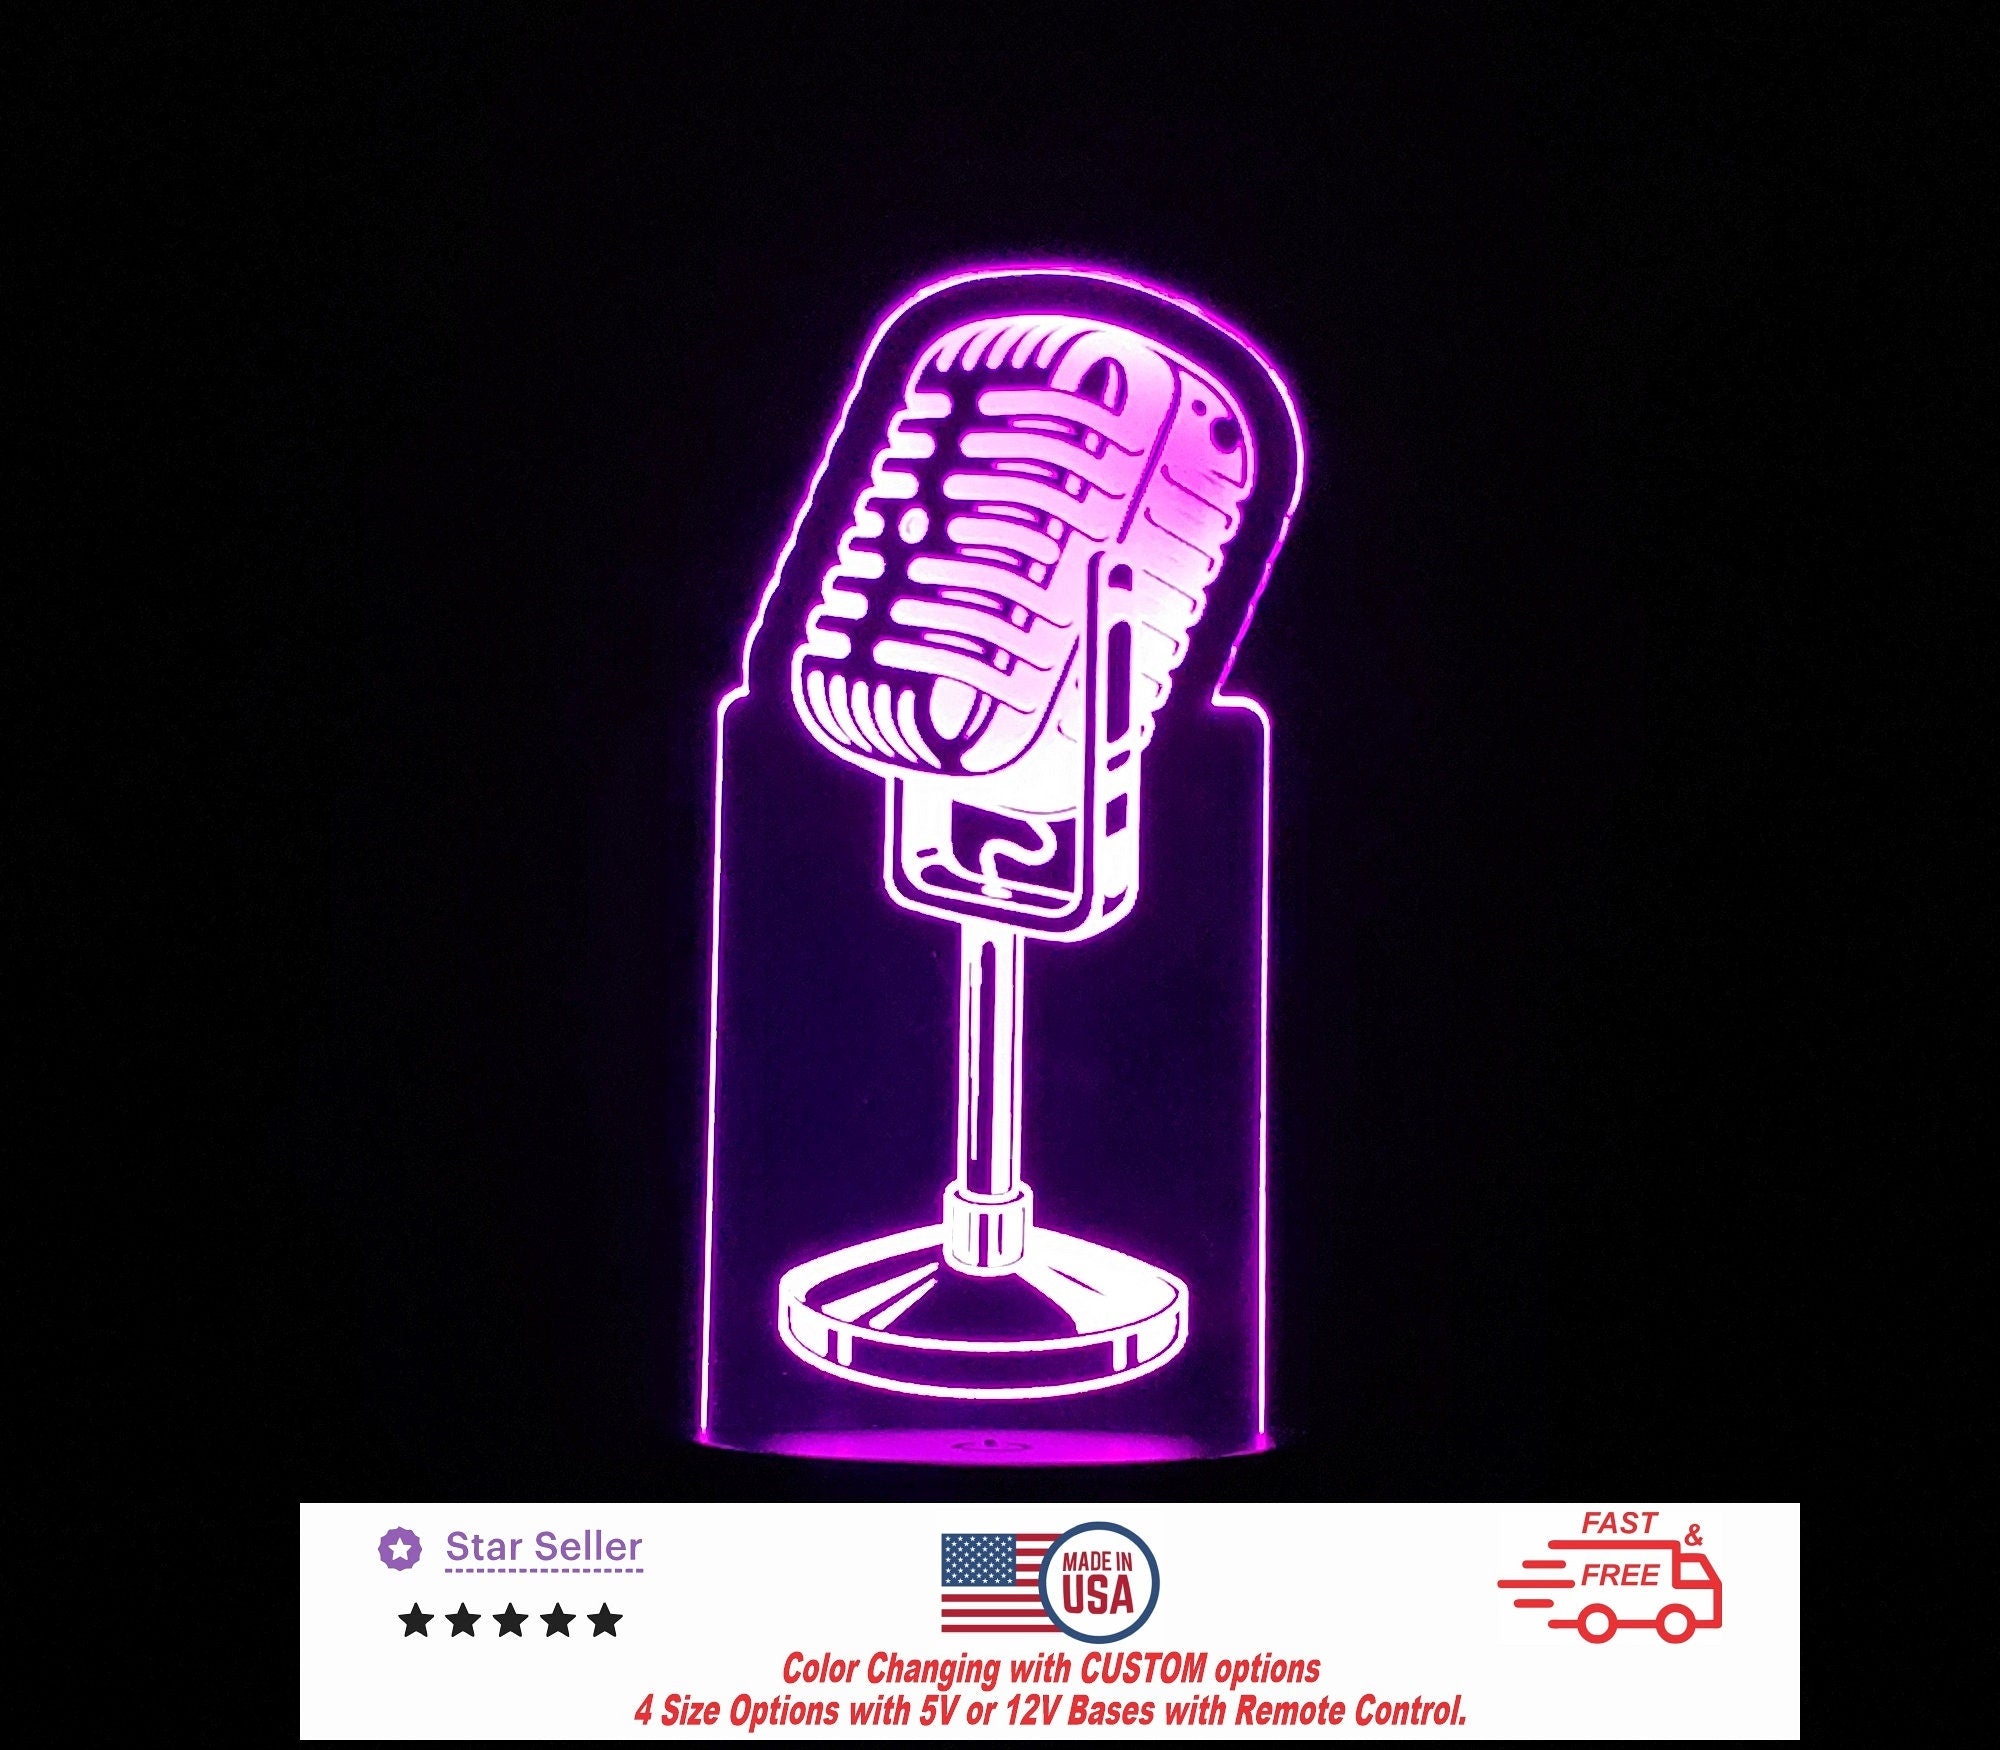 Recording Vintage Microphone Personalized LED Night Light - Neon sign, Room Decor, Stream, Music Studio 4 sizes Free Shipping Made in USA